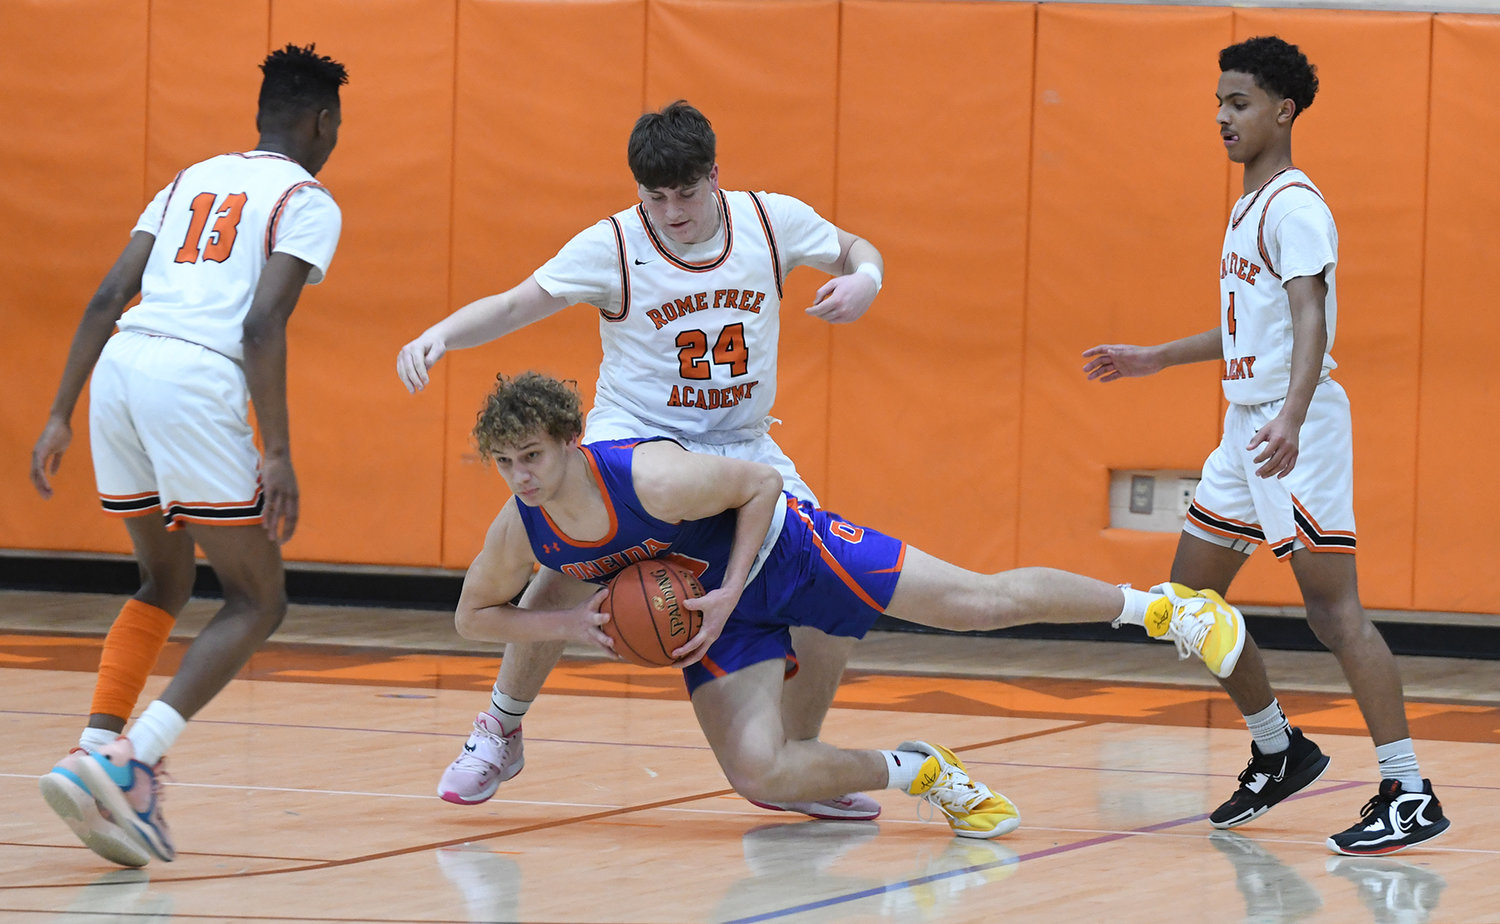 Oneida's Austin Degroat falls to the floor looking to pass the ball while defended by Rome Free Academy players. From left are Deandre Neal, Luke Hammon and Surafia Norries. RFA won the home Tri-Valley League game Friday night 95-80.